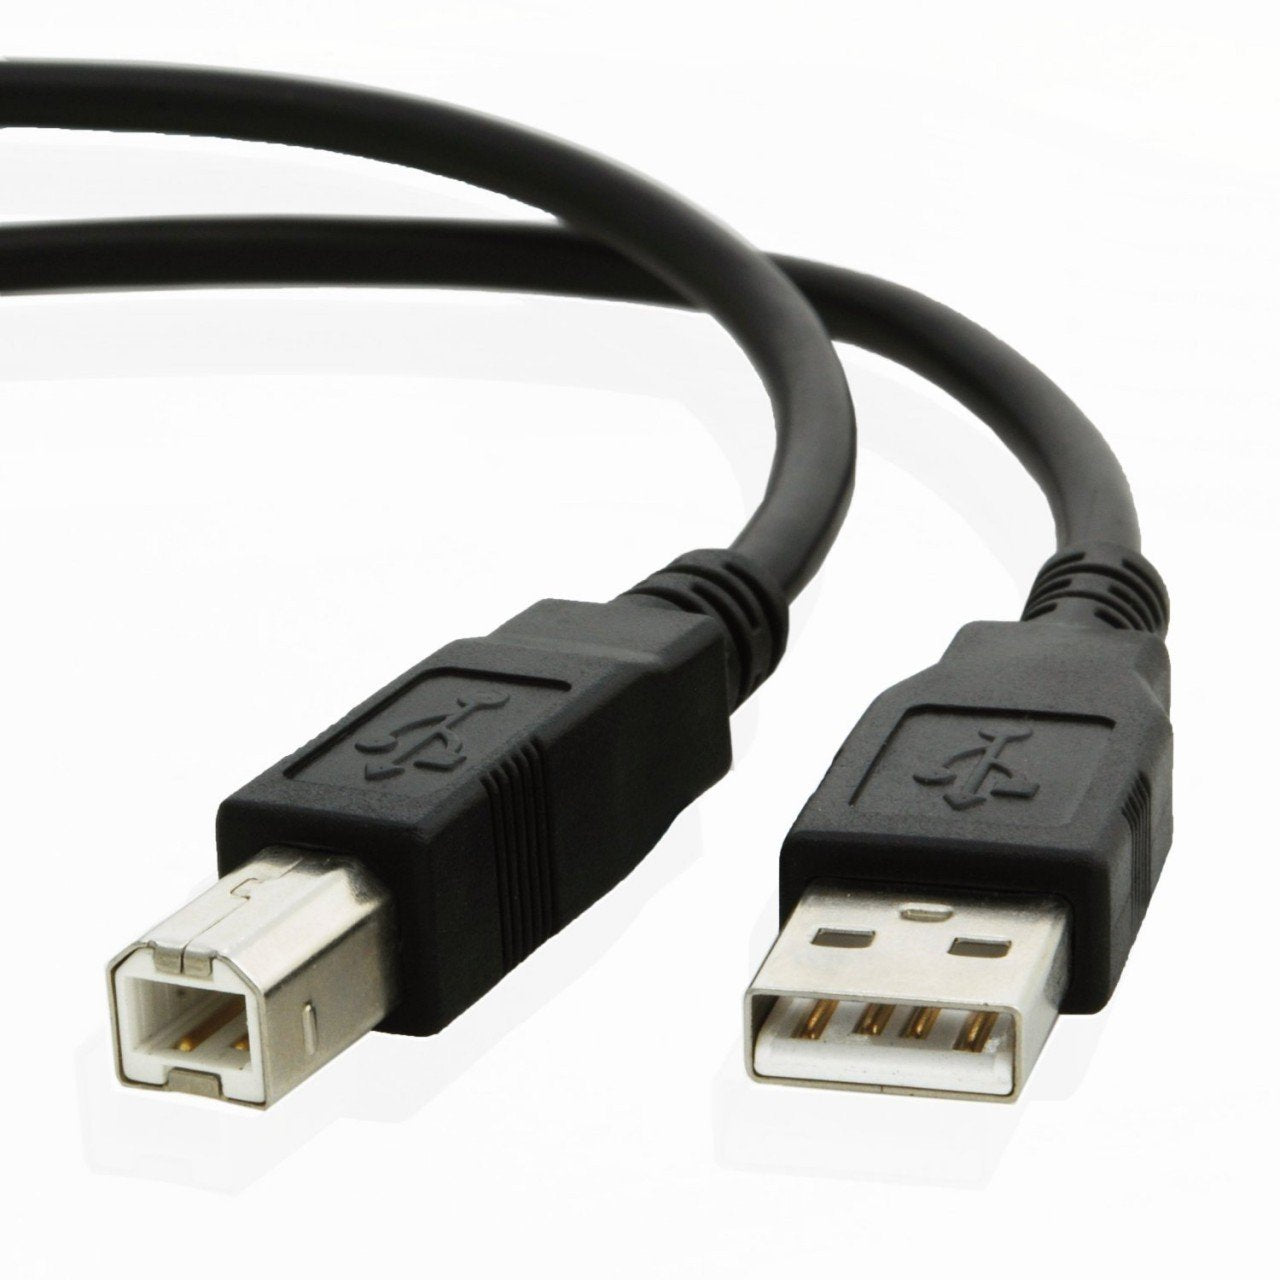 USB cable for Hp OFFICEJET PRO 8210